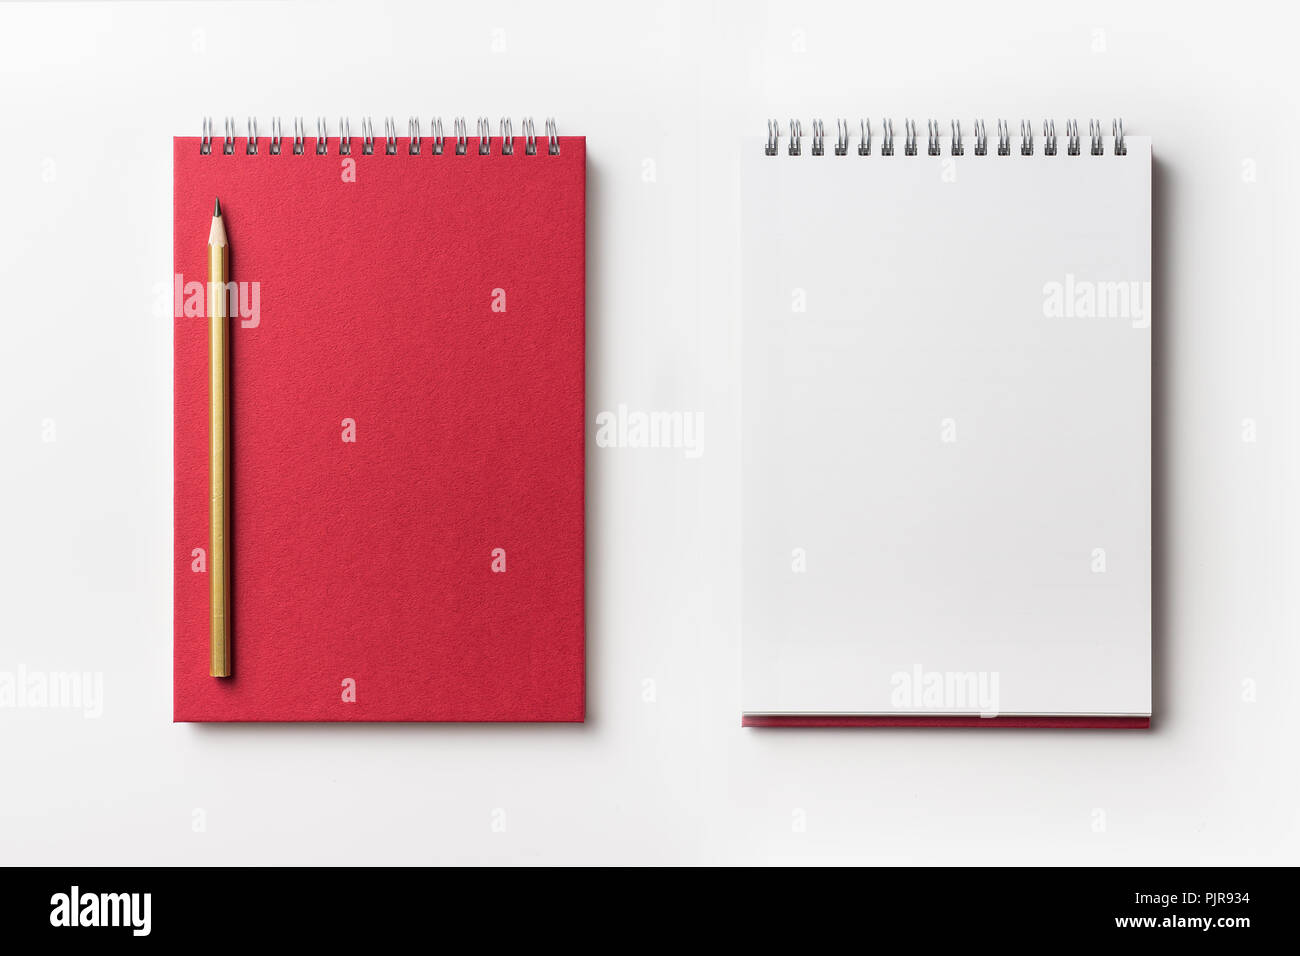 Design concept - Top view of red spiral notebook and color pencil collection isolated on white background for mockup Stock Photo